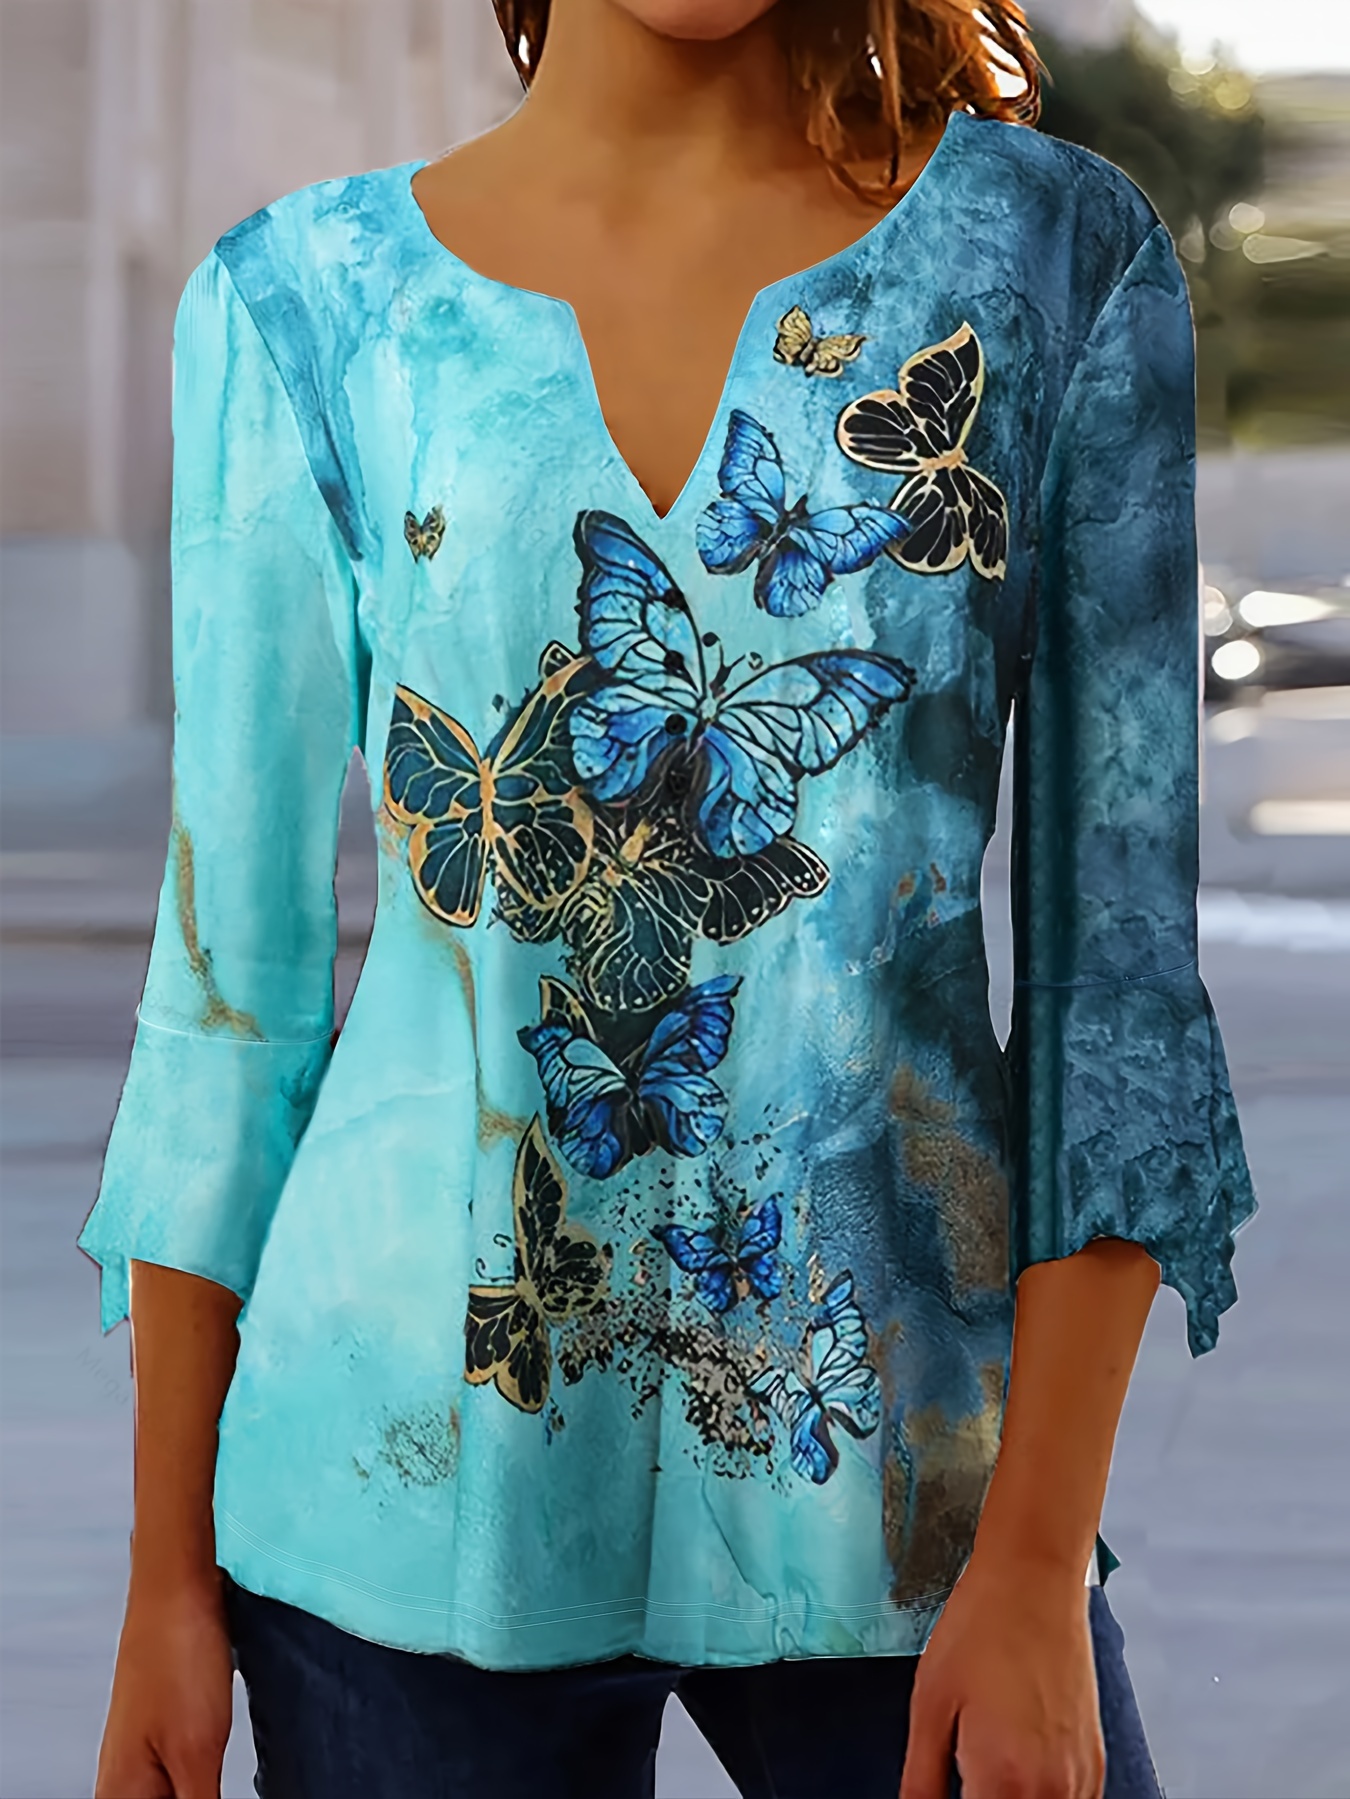 Women's Tops - Shirts, Blouses + Tees - Suzanne Grae